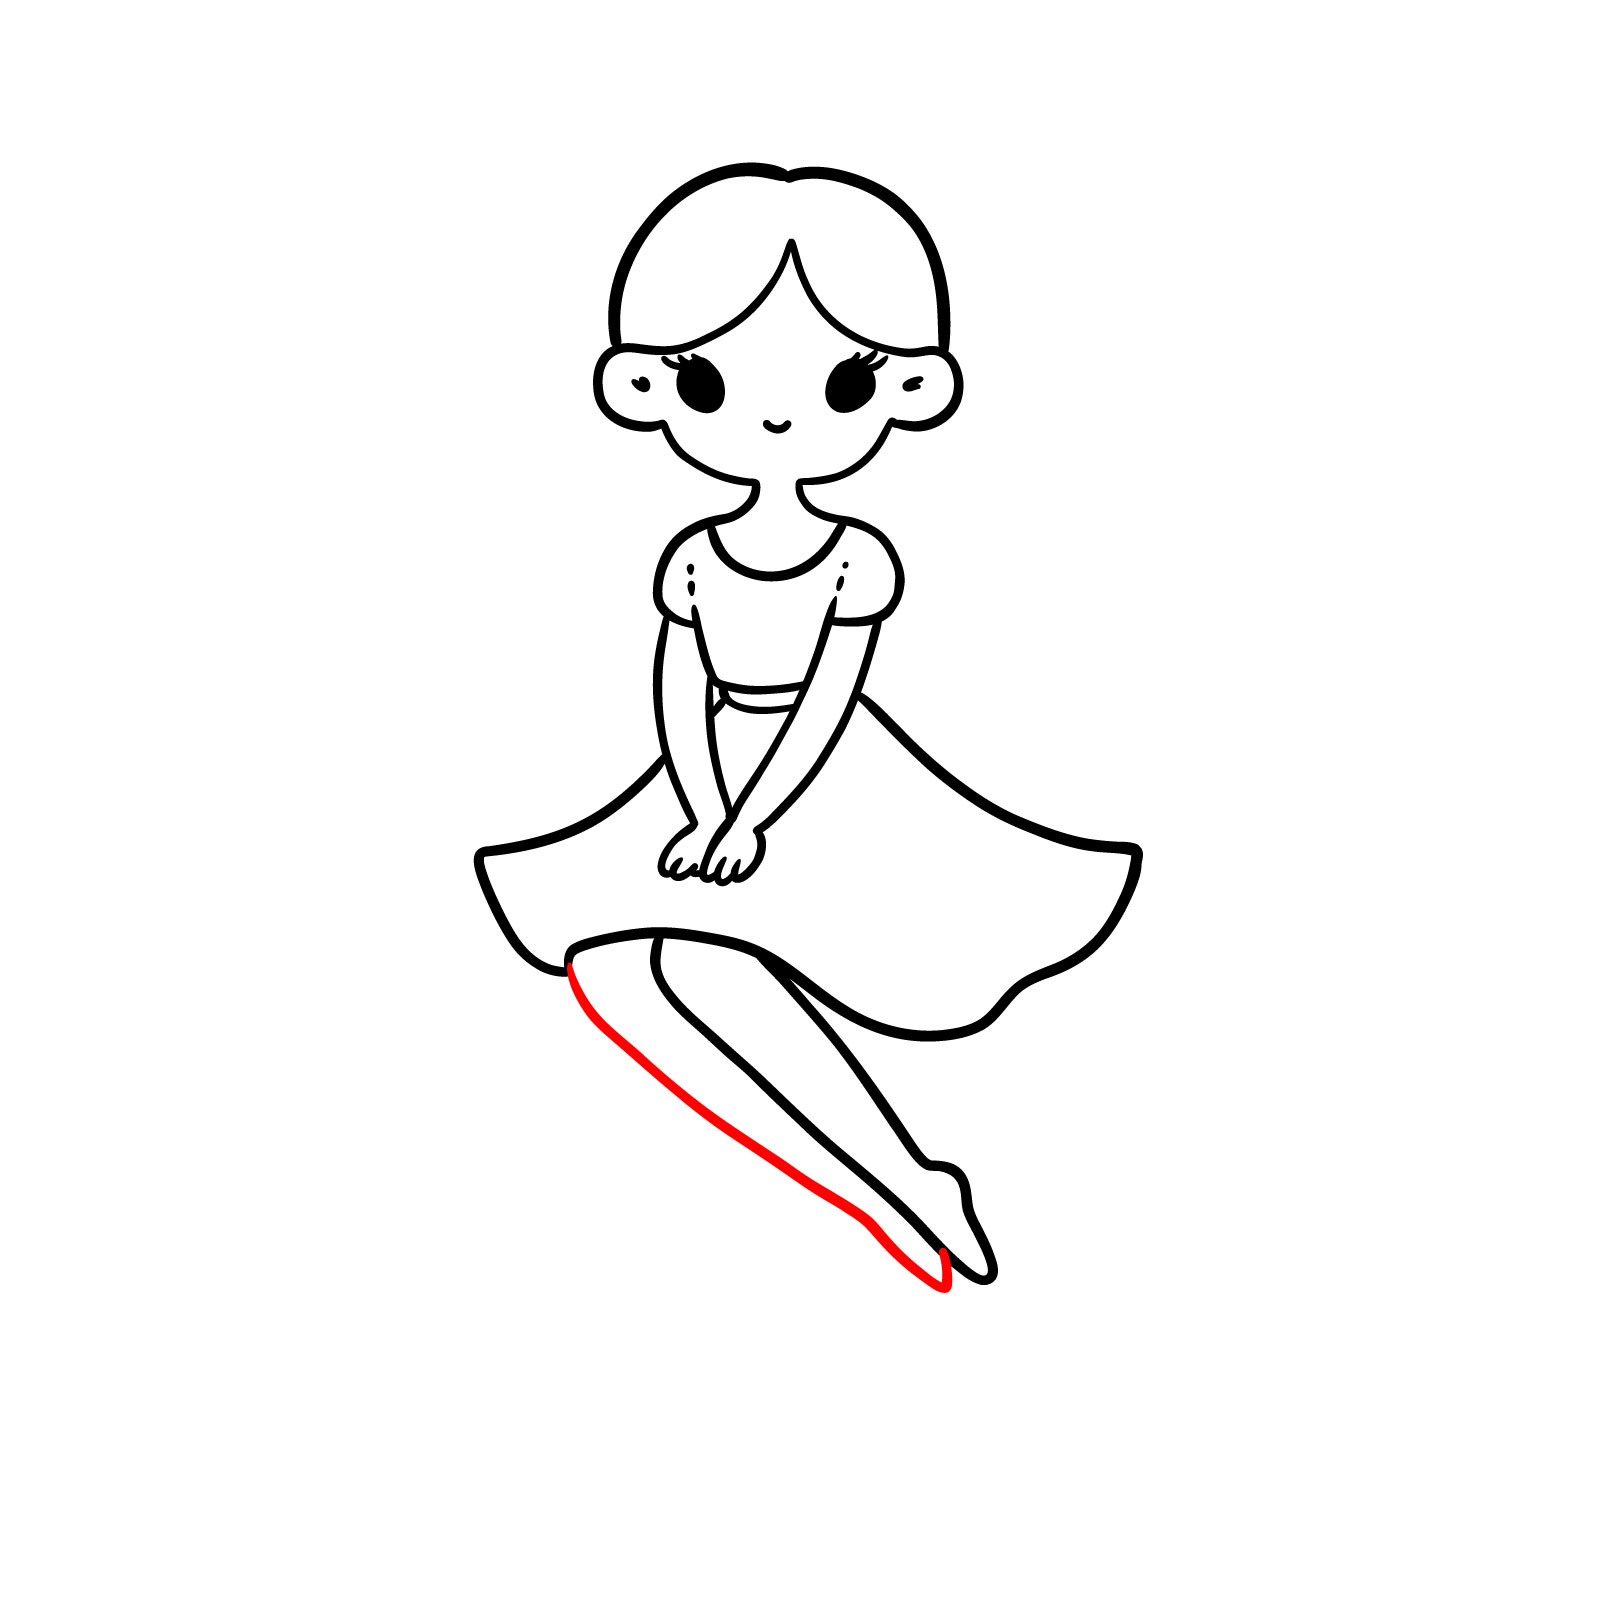 Illustration of the fairy's right leg bent at the knee - step 11